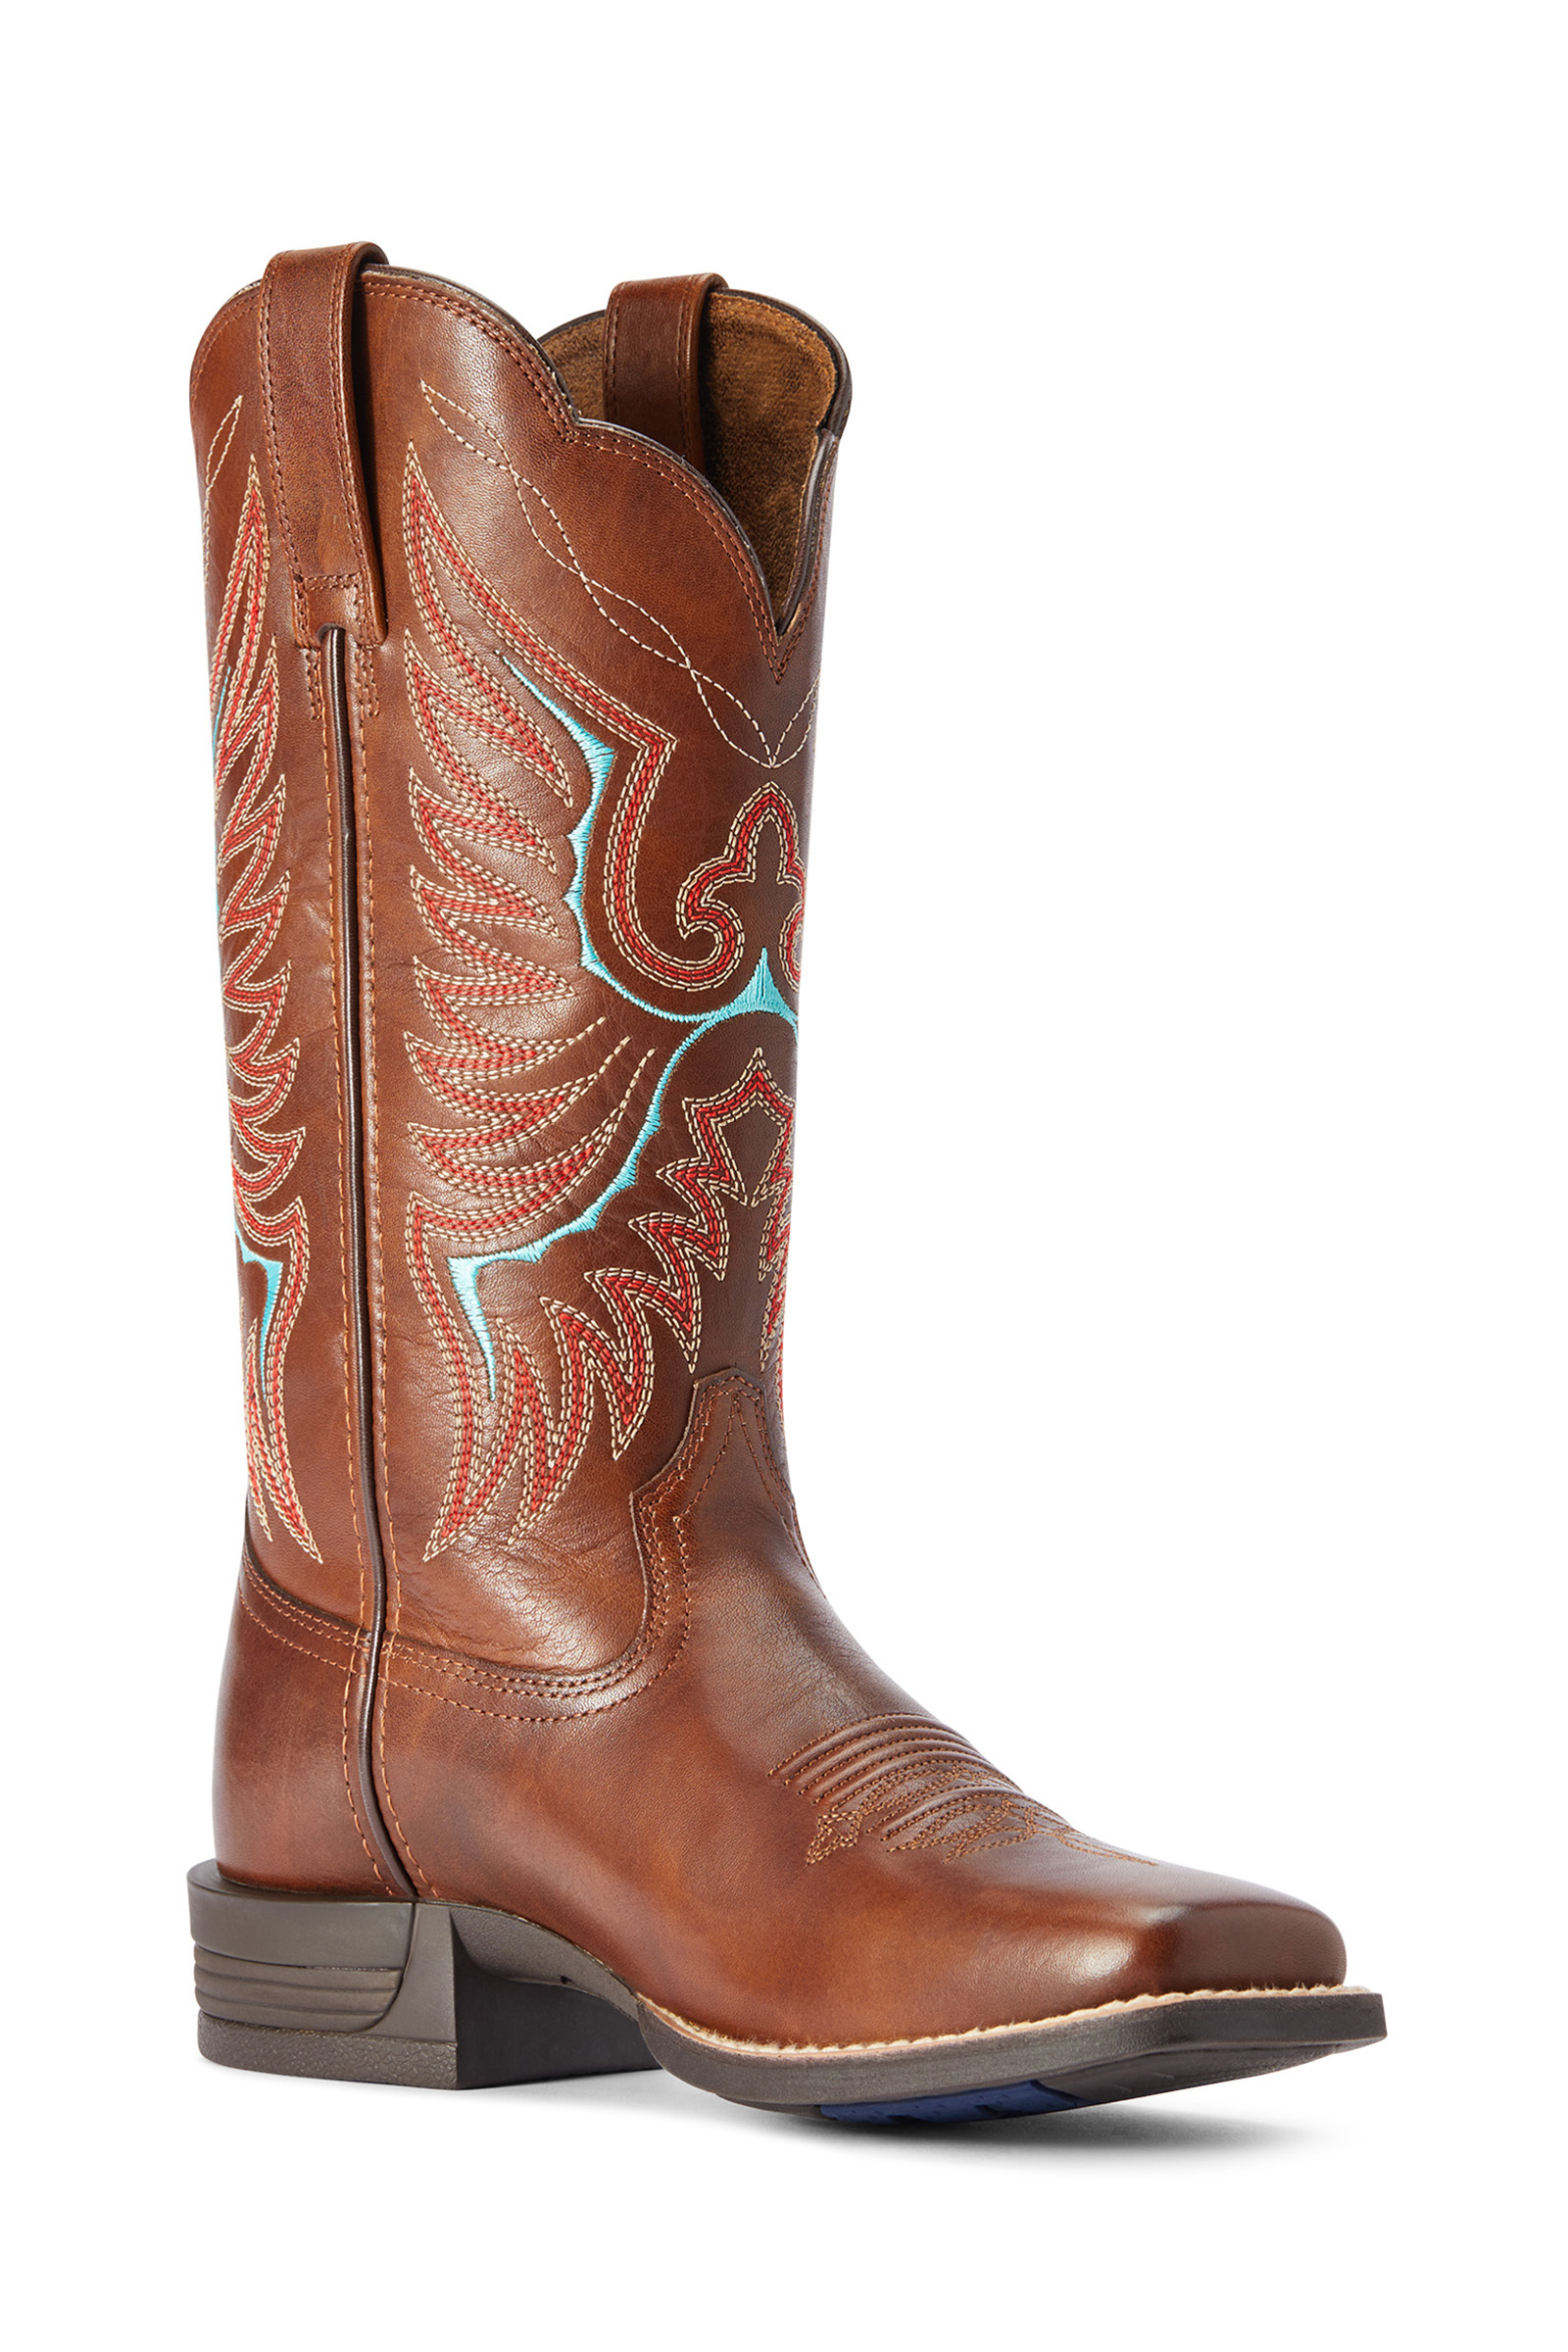 Women's Ariat Roper Boots Factory Clearance